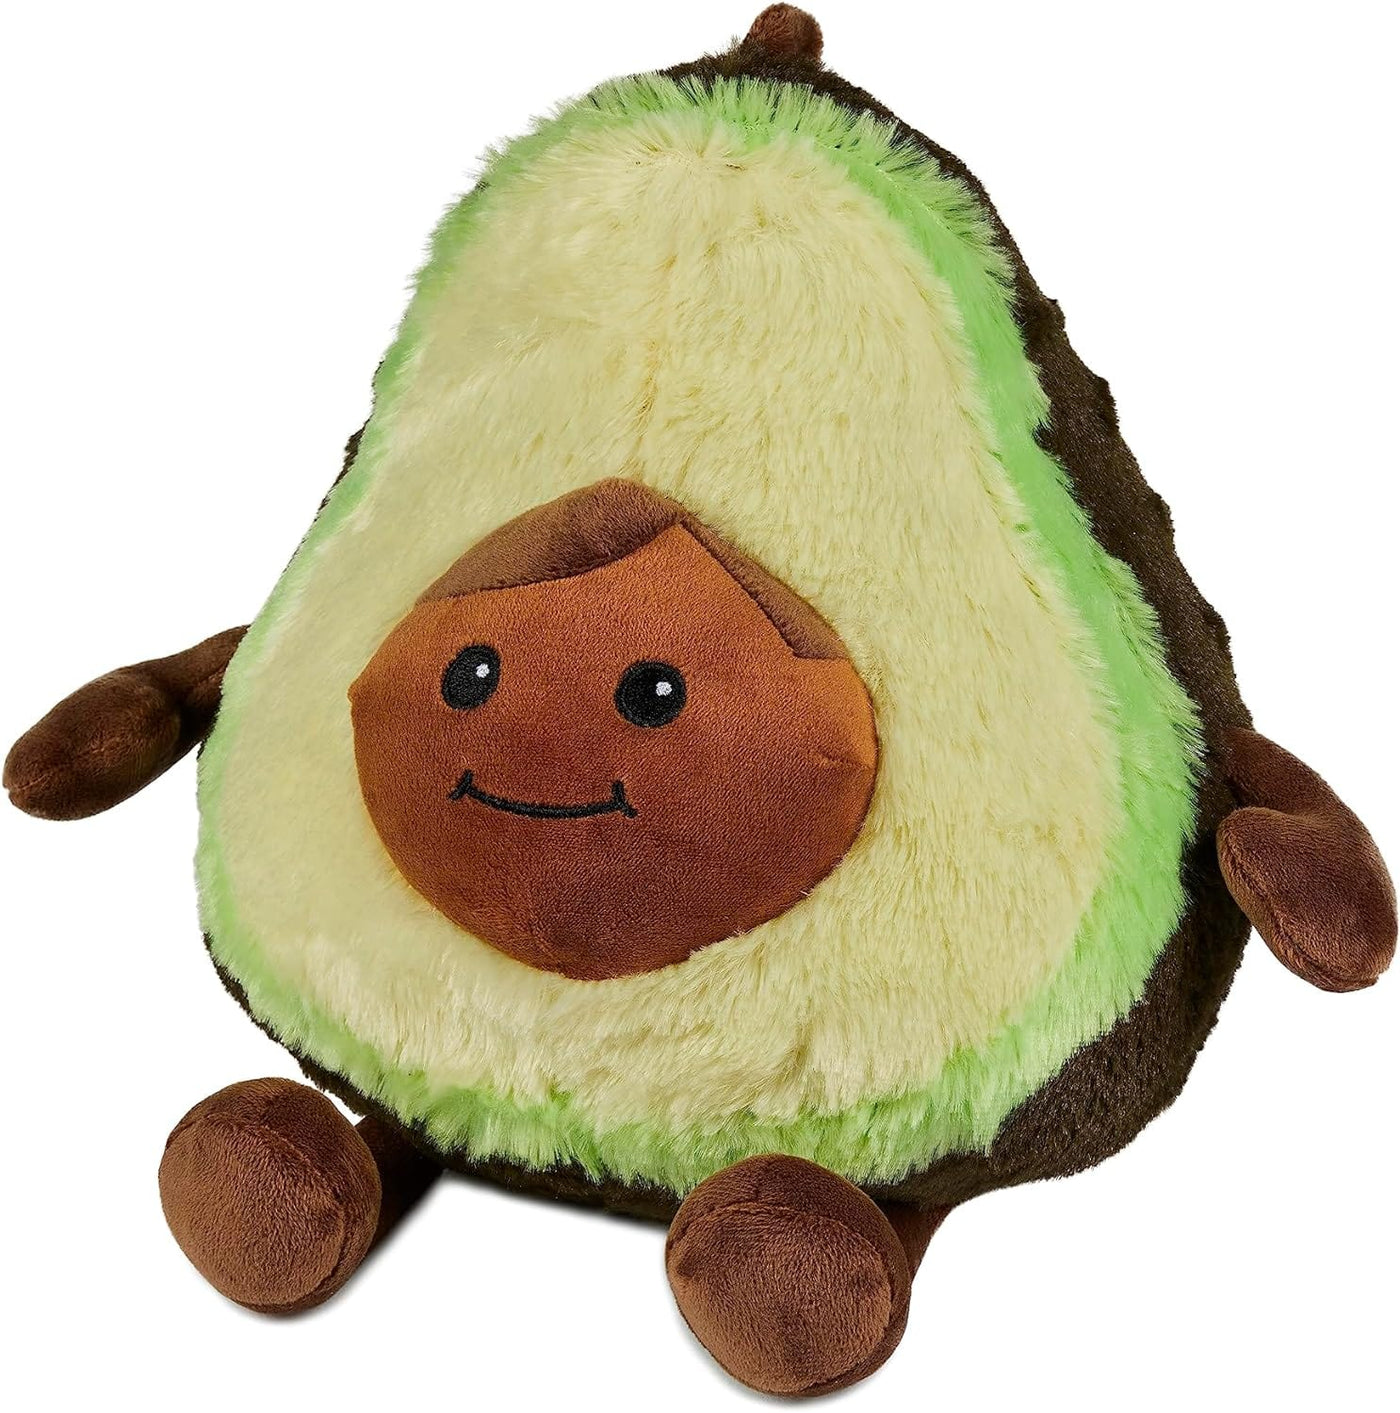 Warmies Microwavable Toy Microwaveable Lavender Scented Plush Avocado